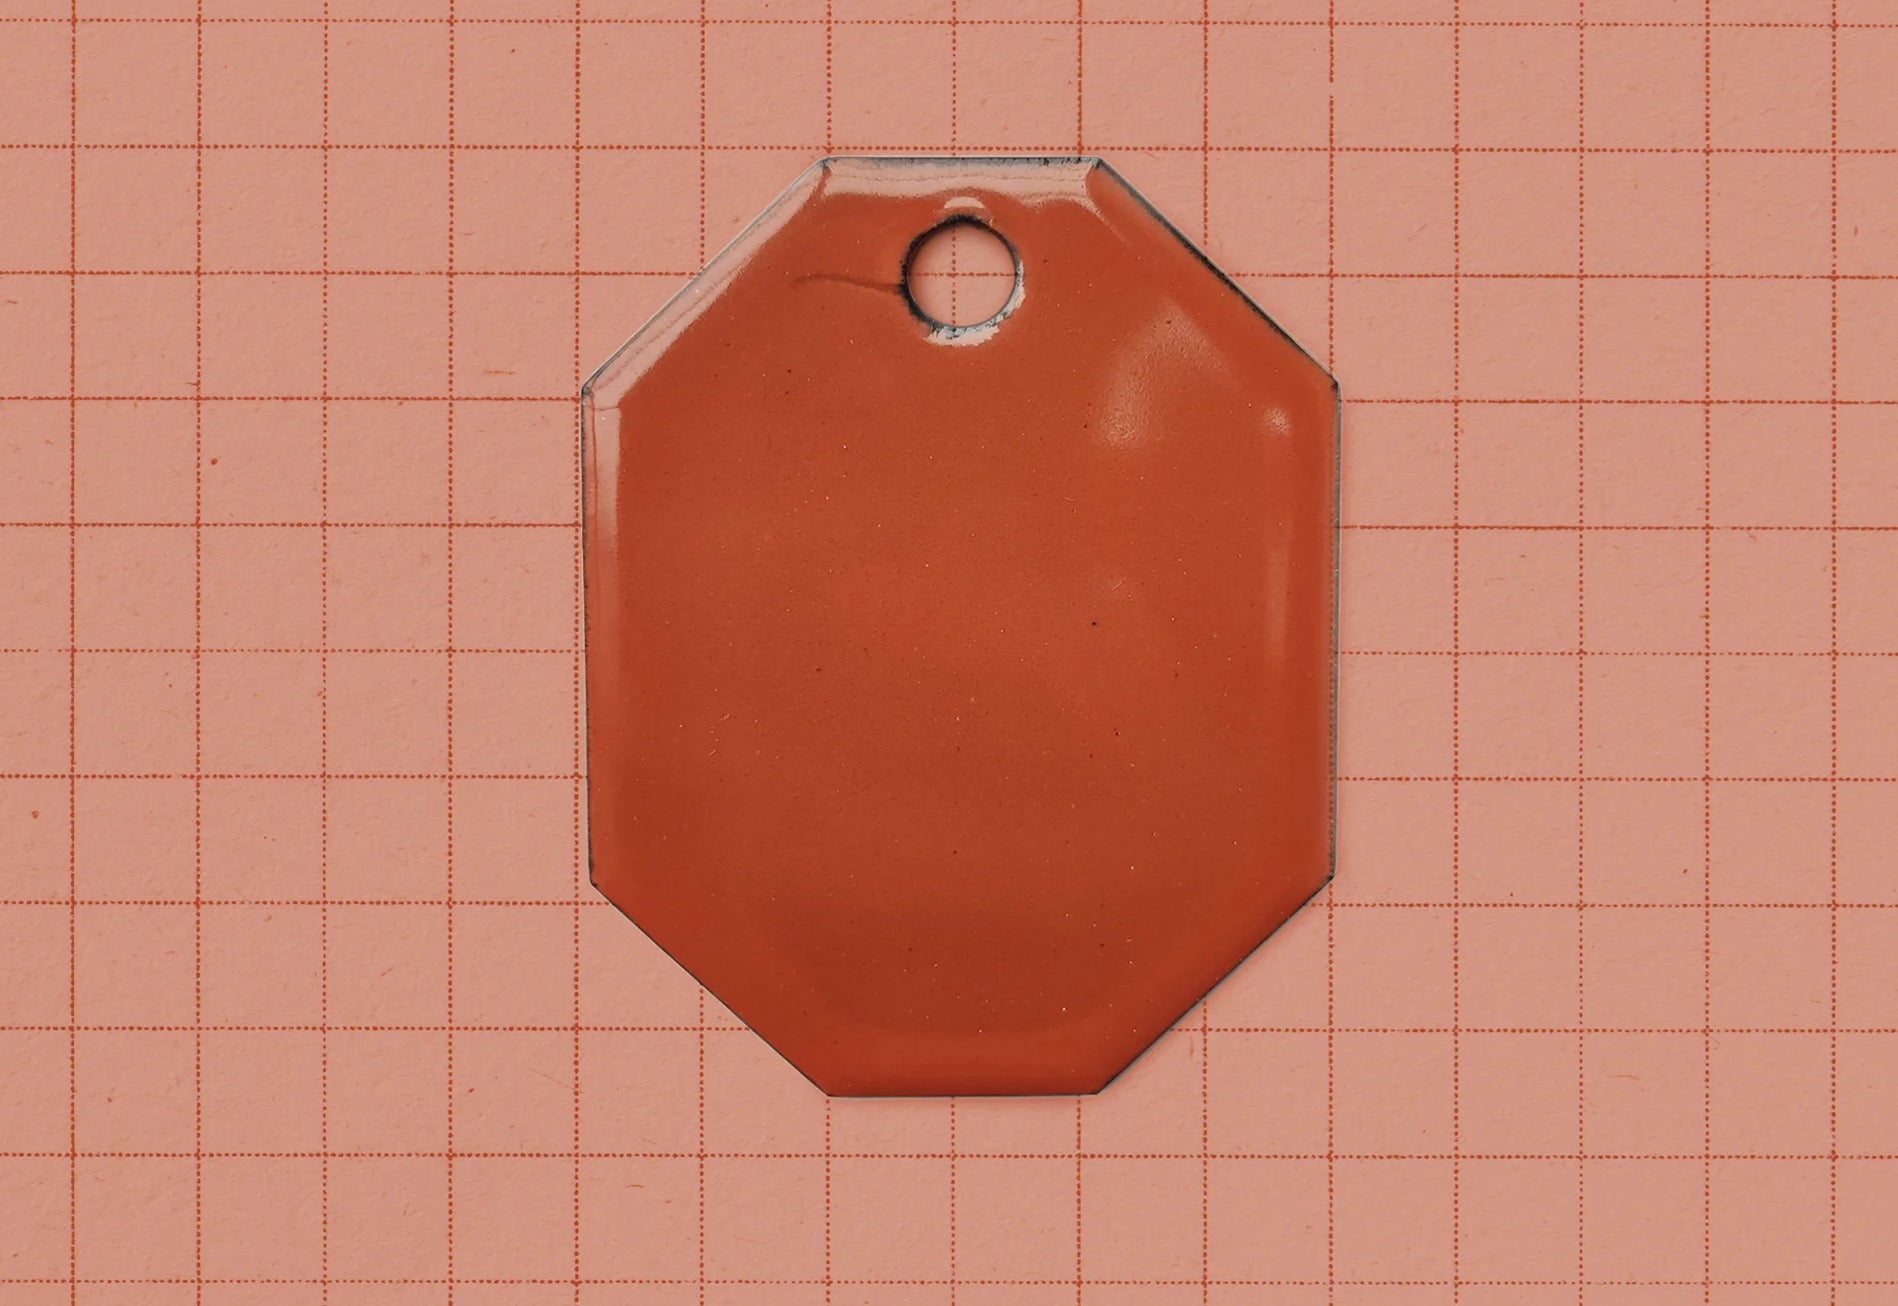 A vitreous enamel colour sample of the colour Terracotta from Coolicon Lighting